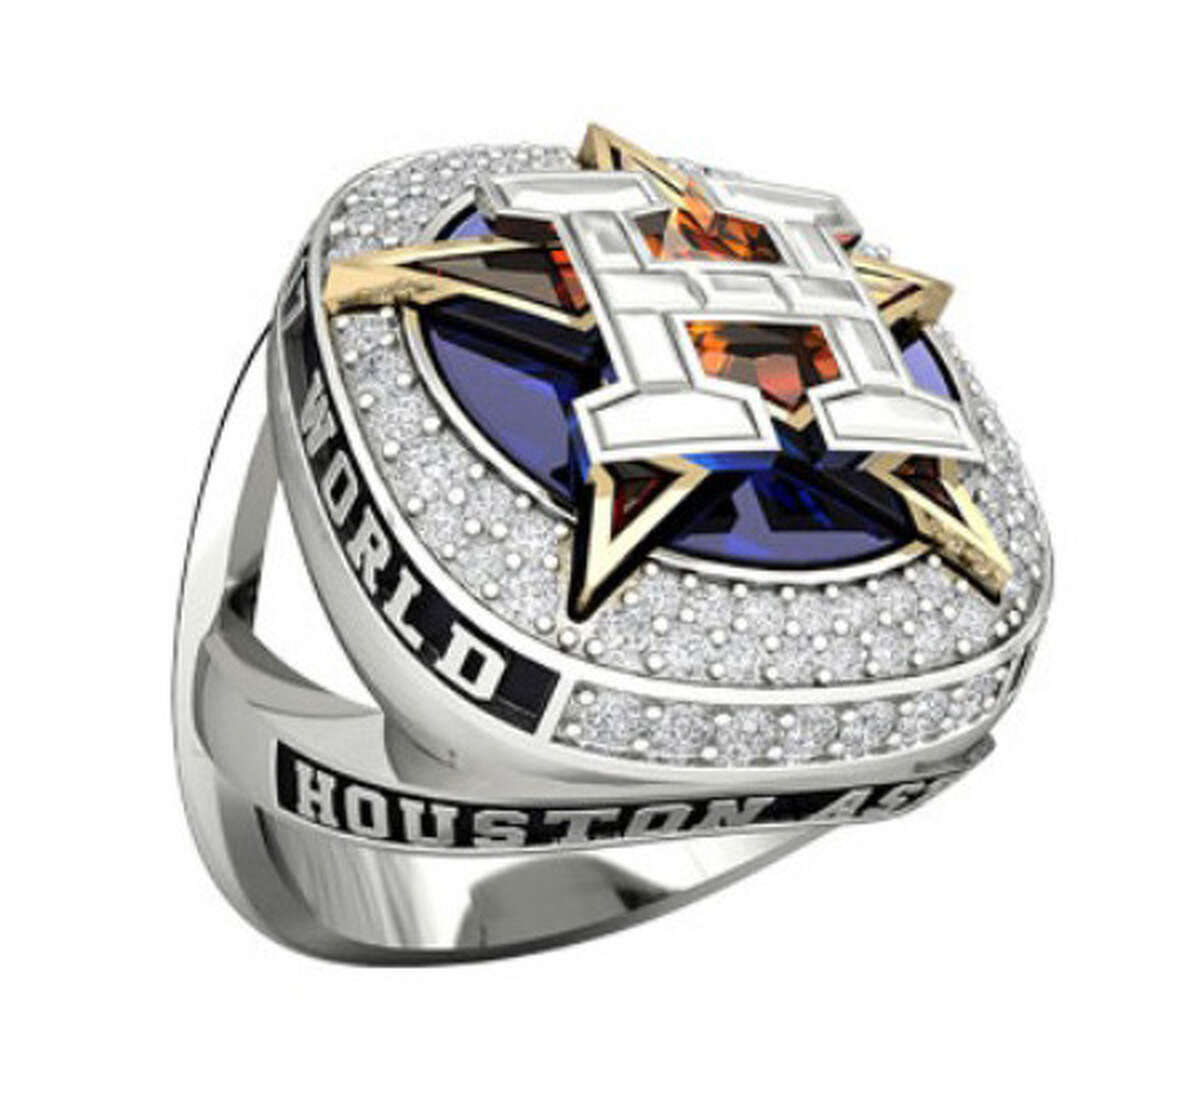 Astros World Series jewelry for fans